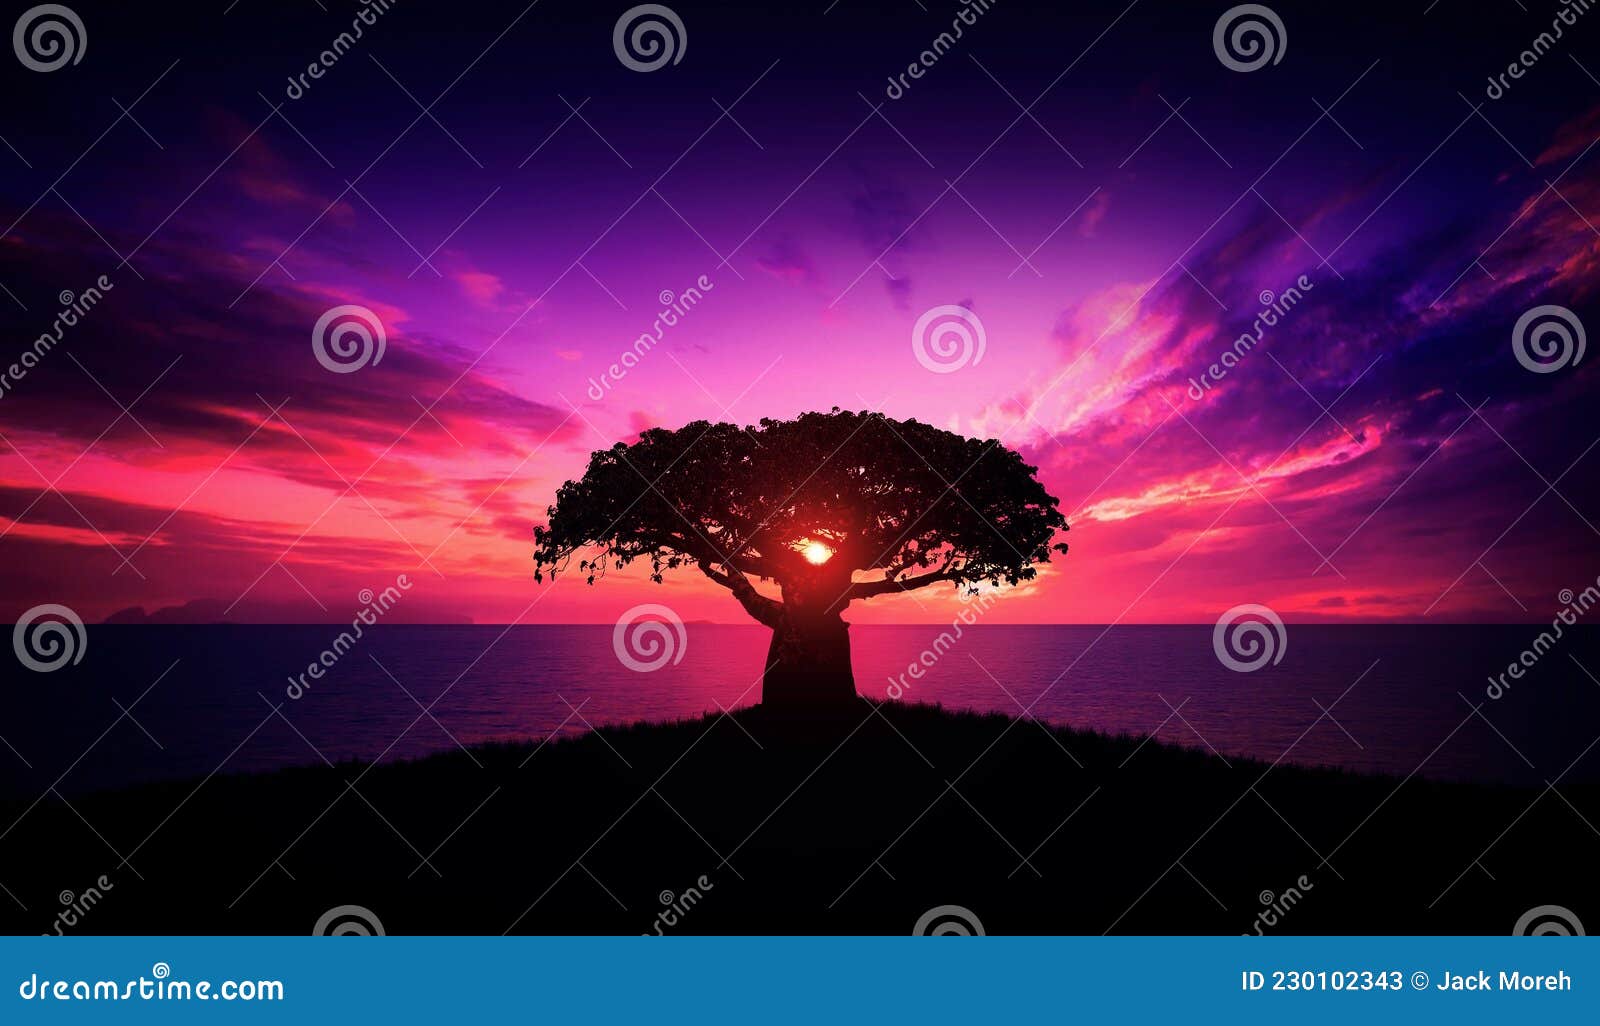 baobab tree at sunset - african landscape - calm - relaxing - tranquility